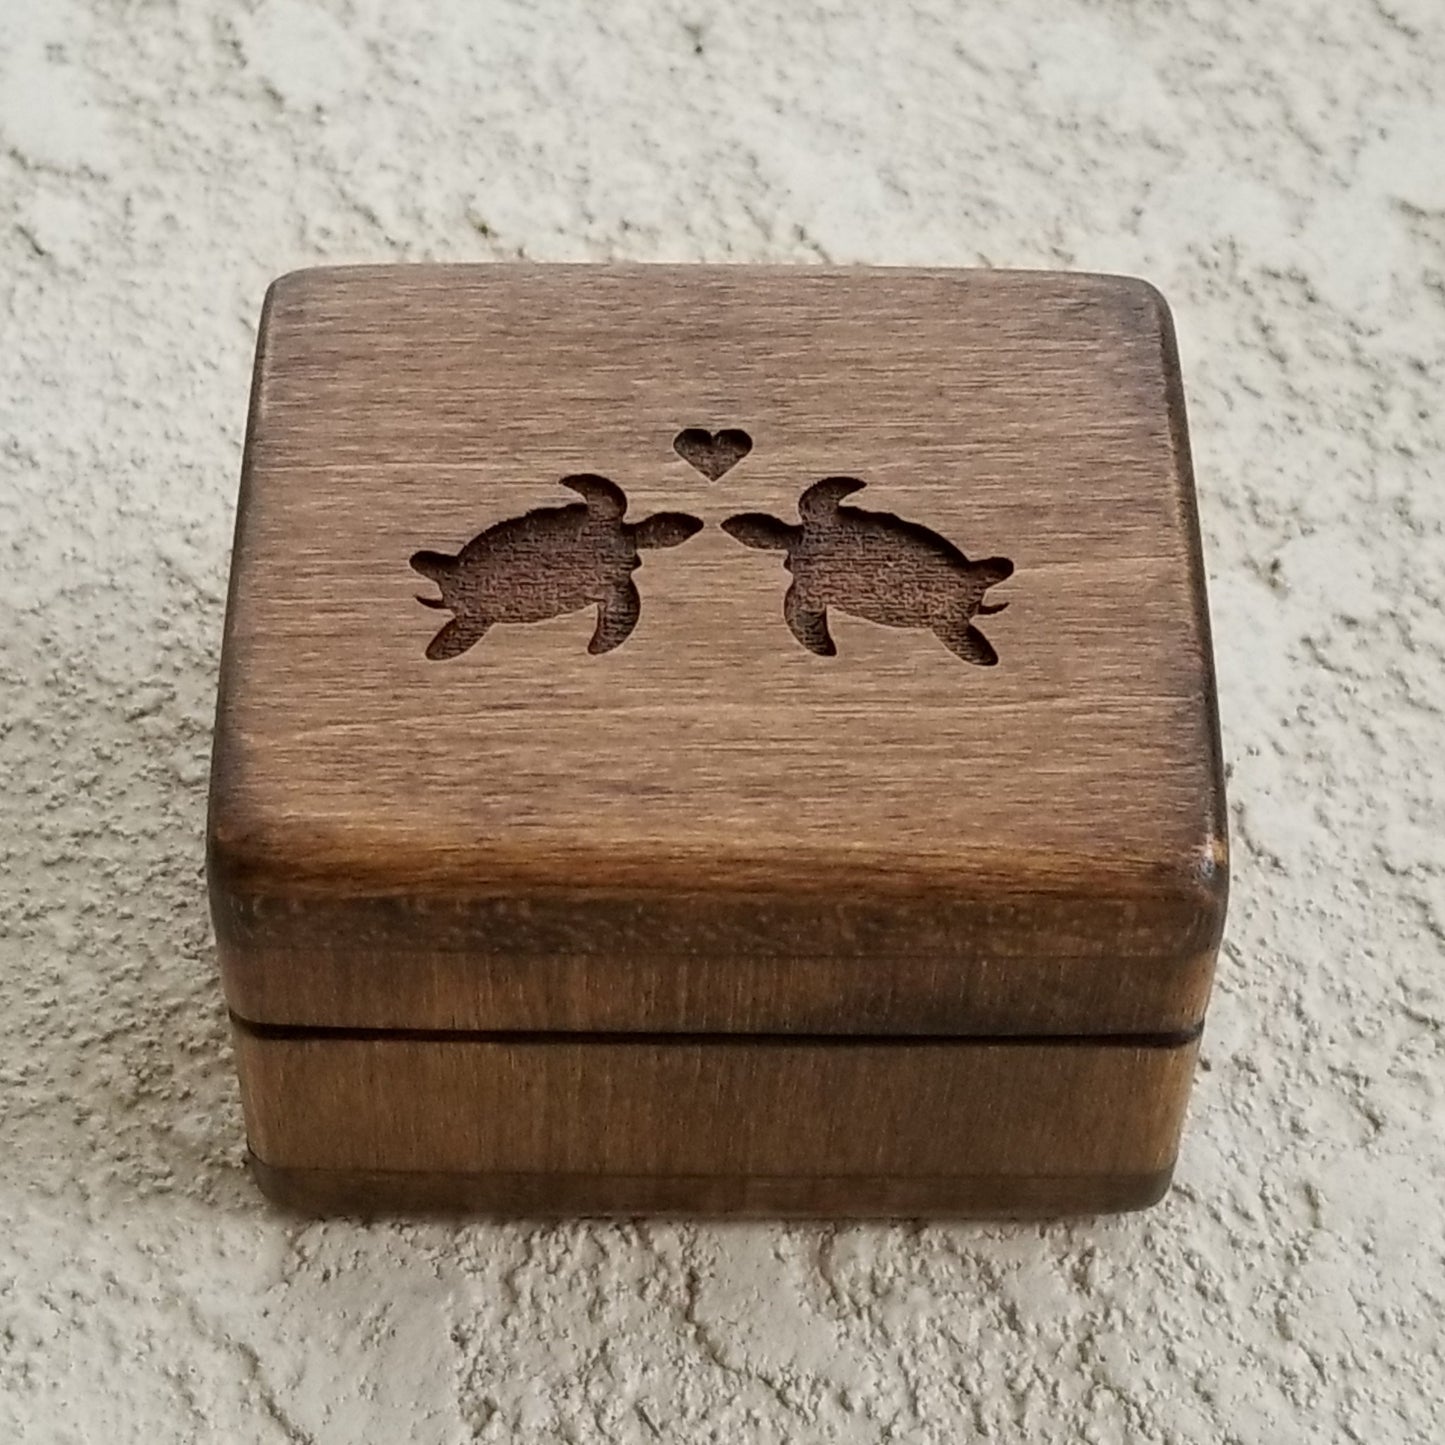 wooden ring box with turtles engraved on top